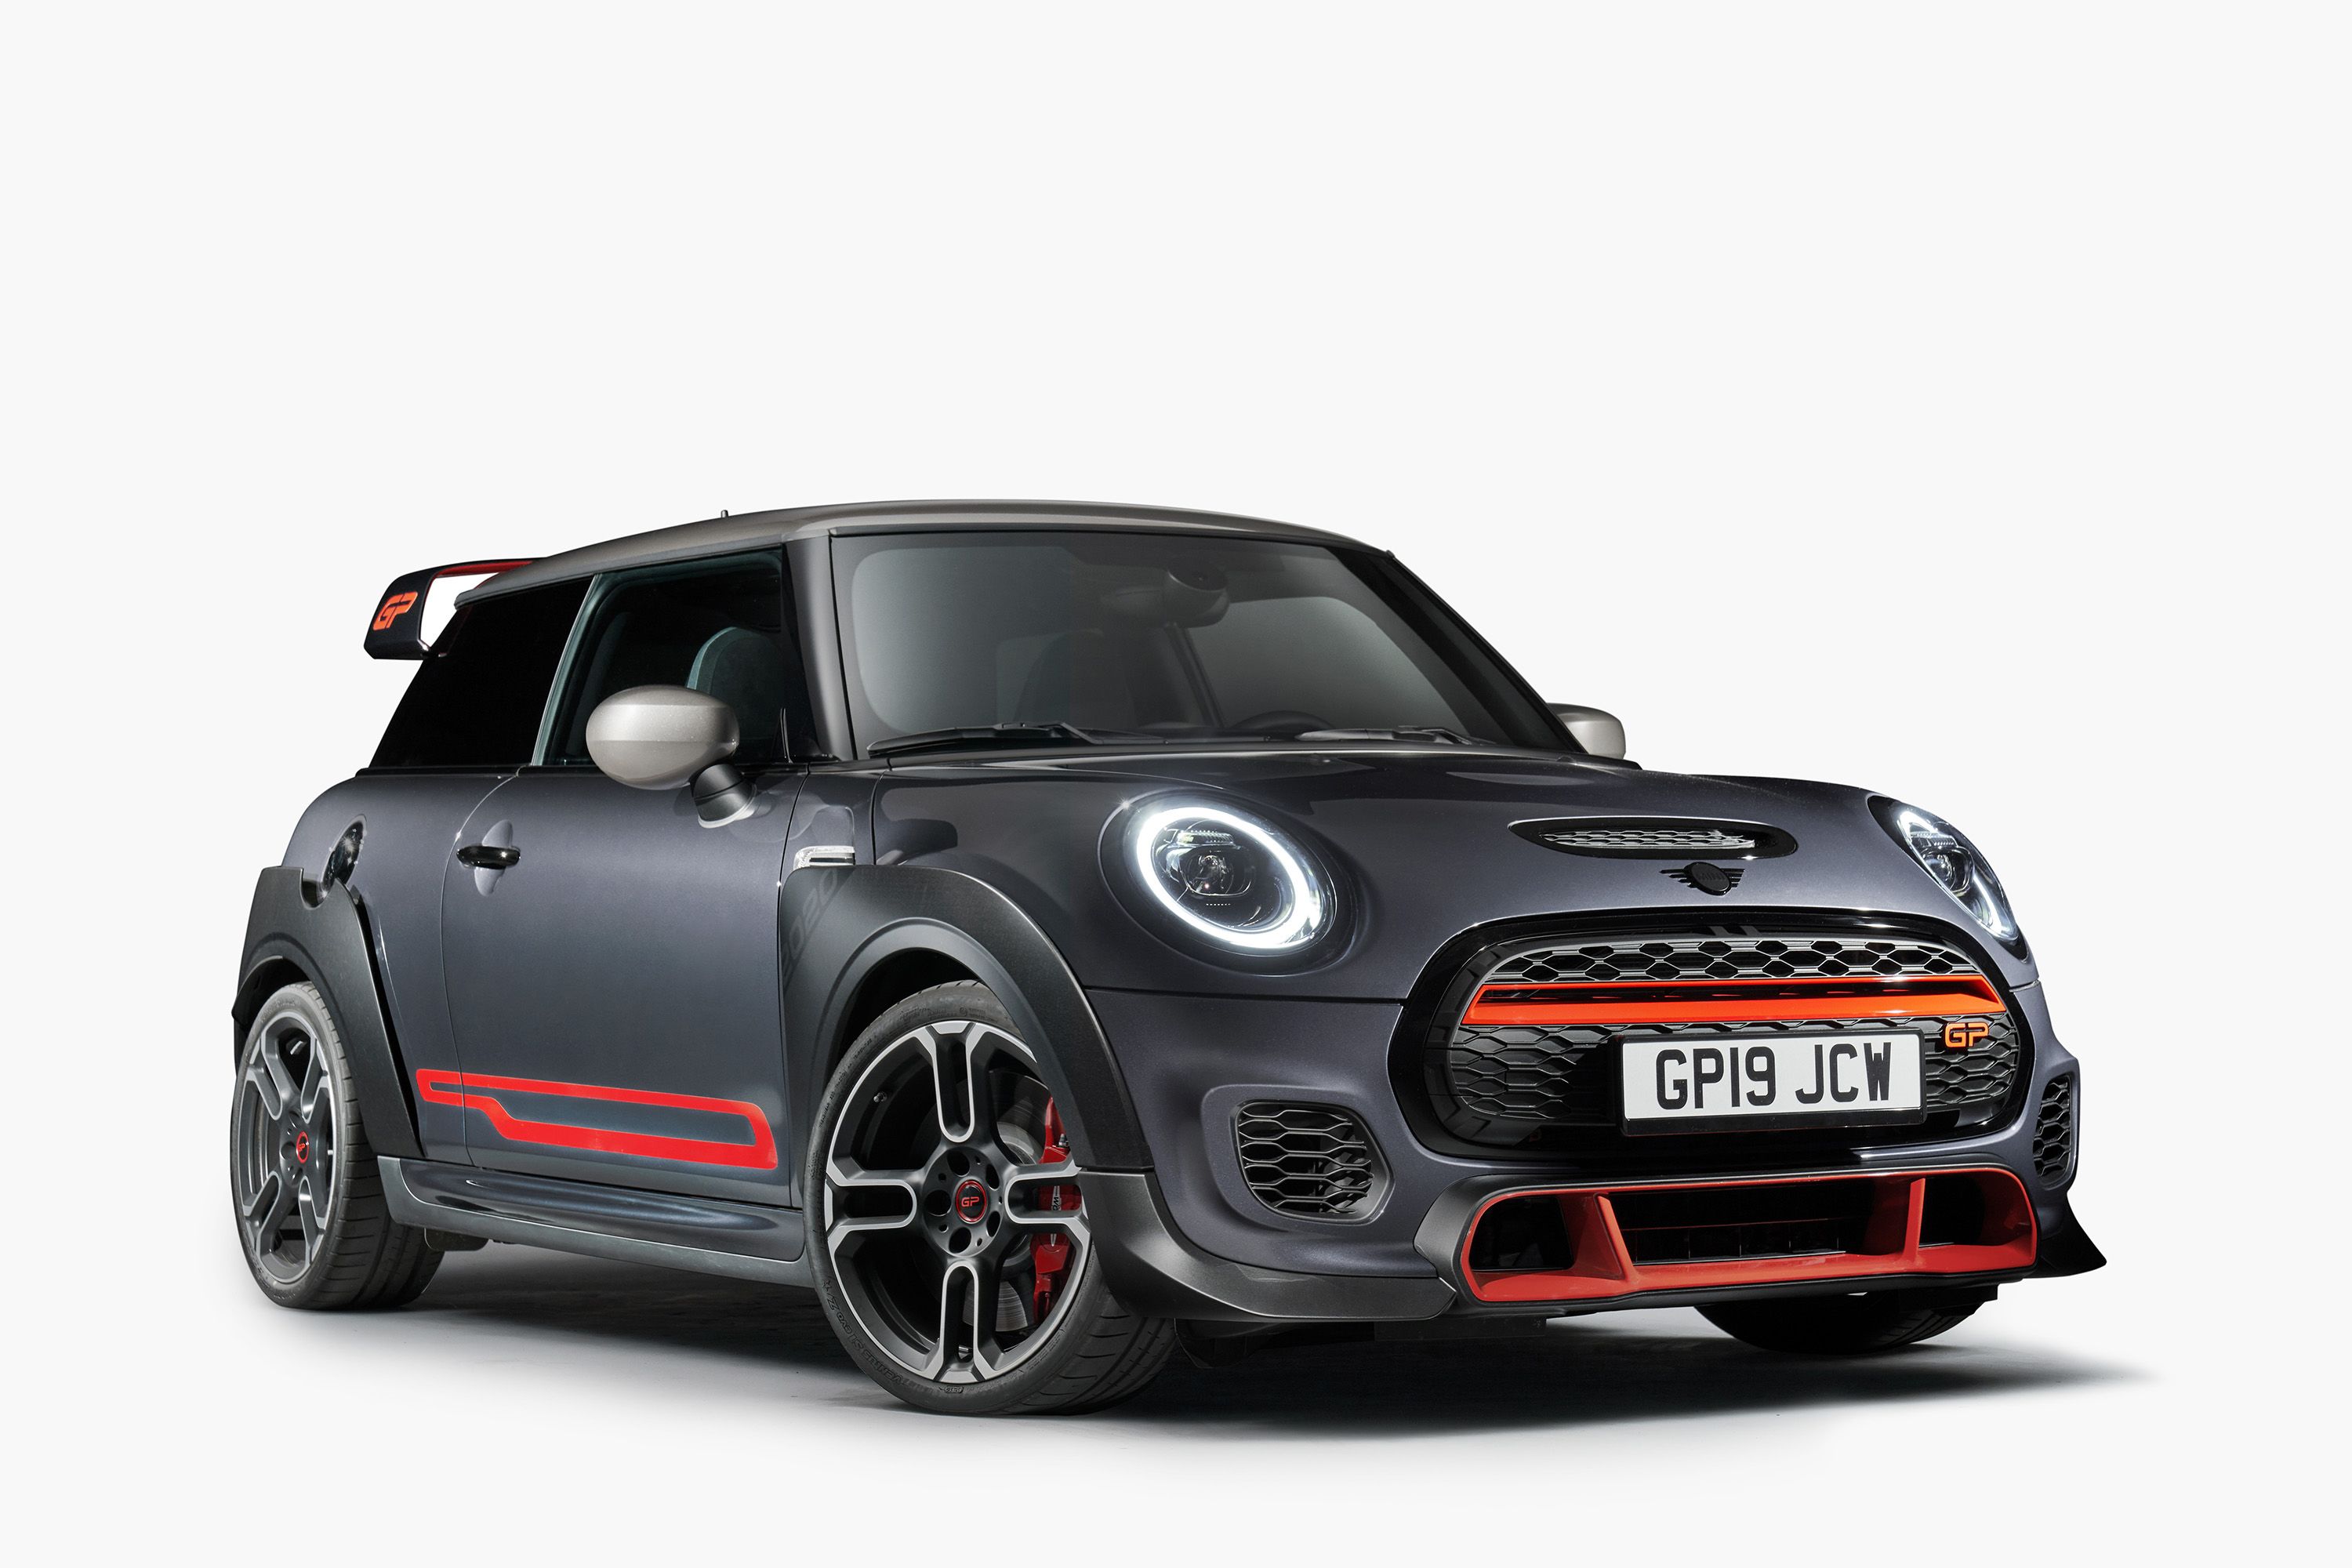 The new Mini Cooper JCW GP is quirky and quick, but not worth the